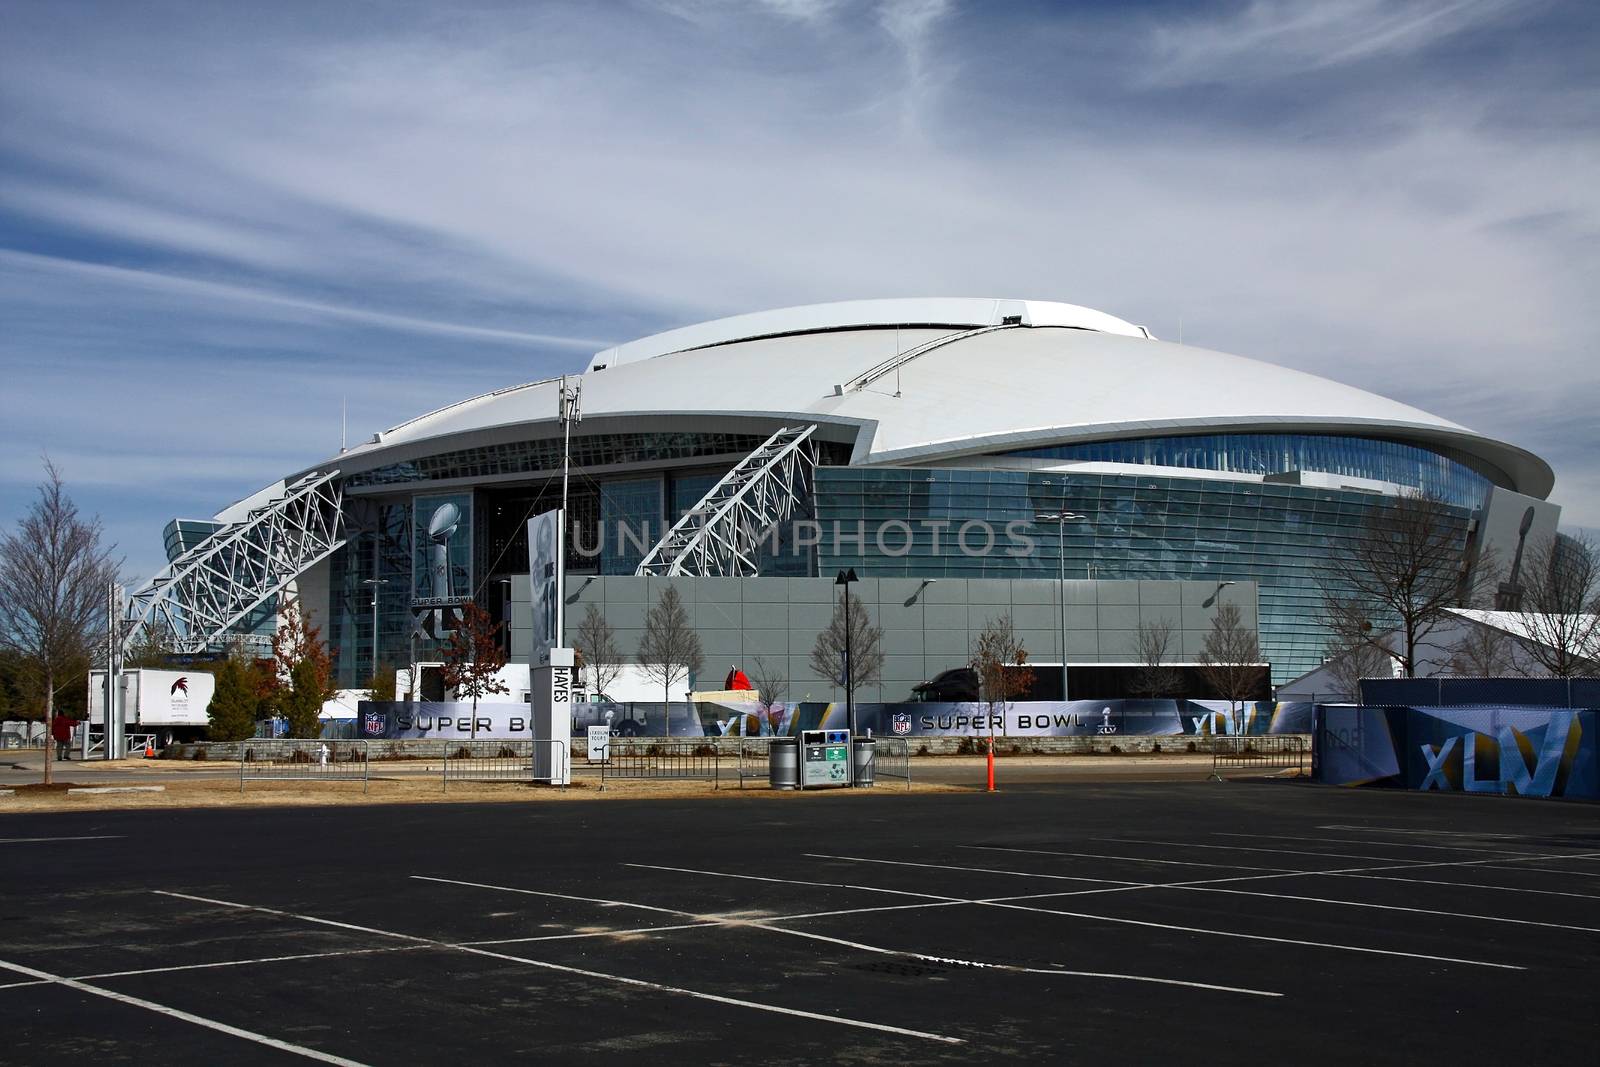 ARLINGTON - JAN 26: Preparations are underway at Cowboys Stadium in Arlington, Texas for Super Bowl XLV between the Green Bay Packers and Pittsburgh Steelers. Taken January 26, 2011 in Arlington, TX.